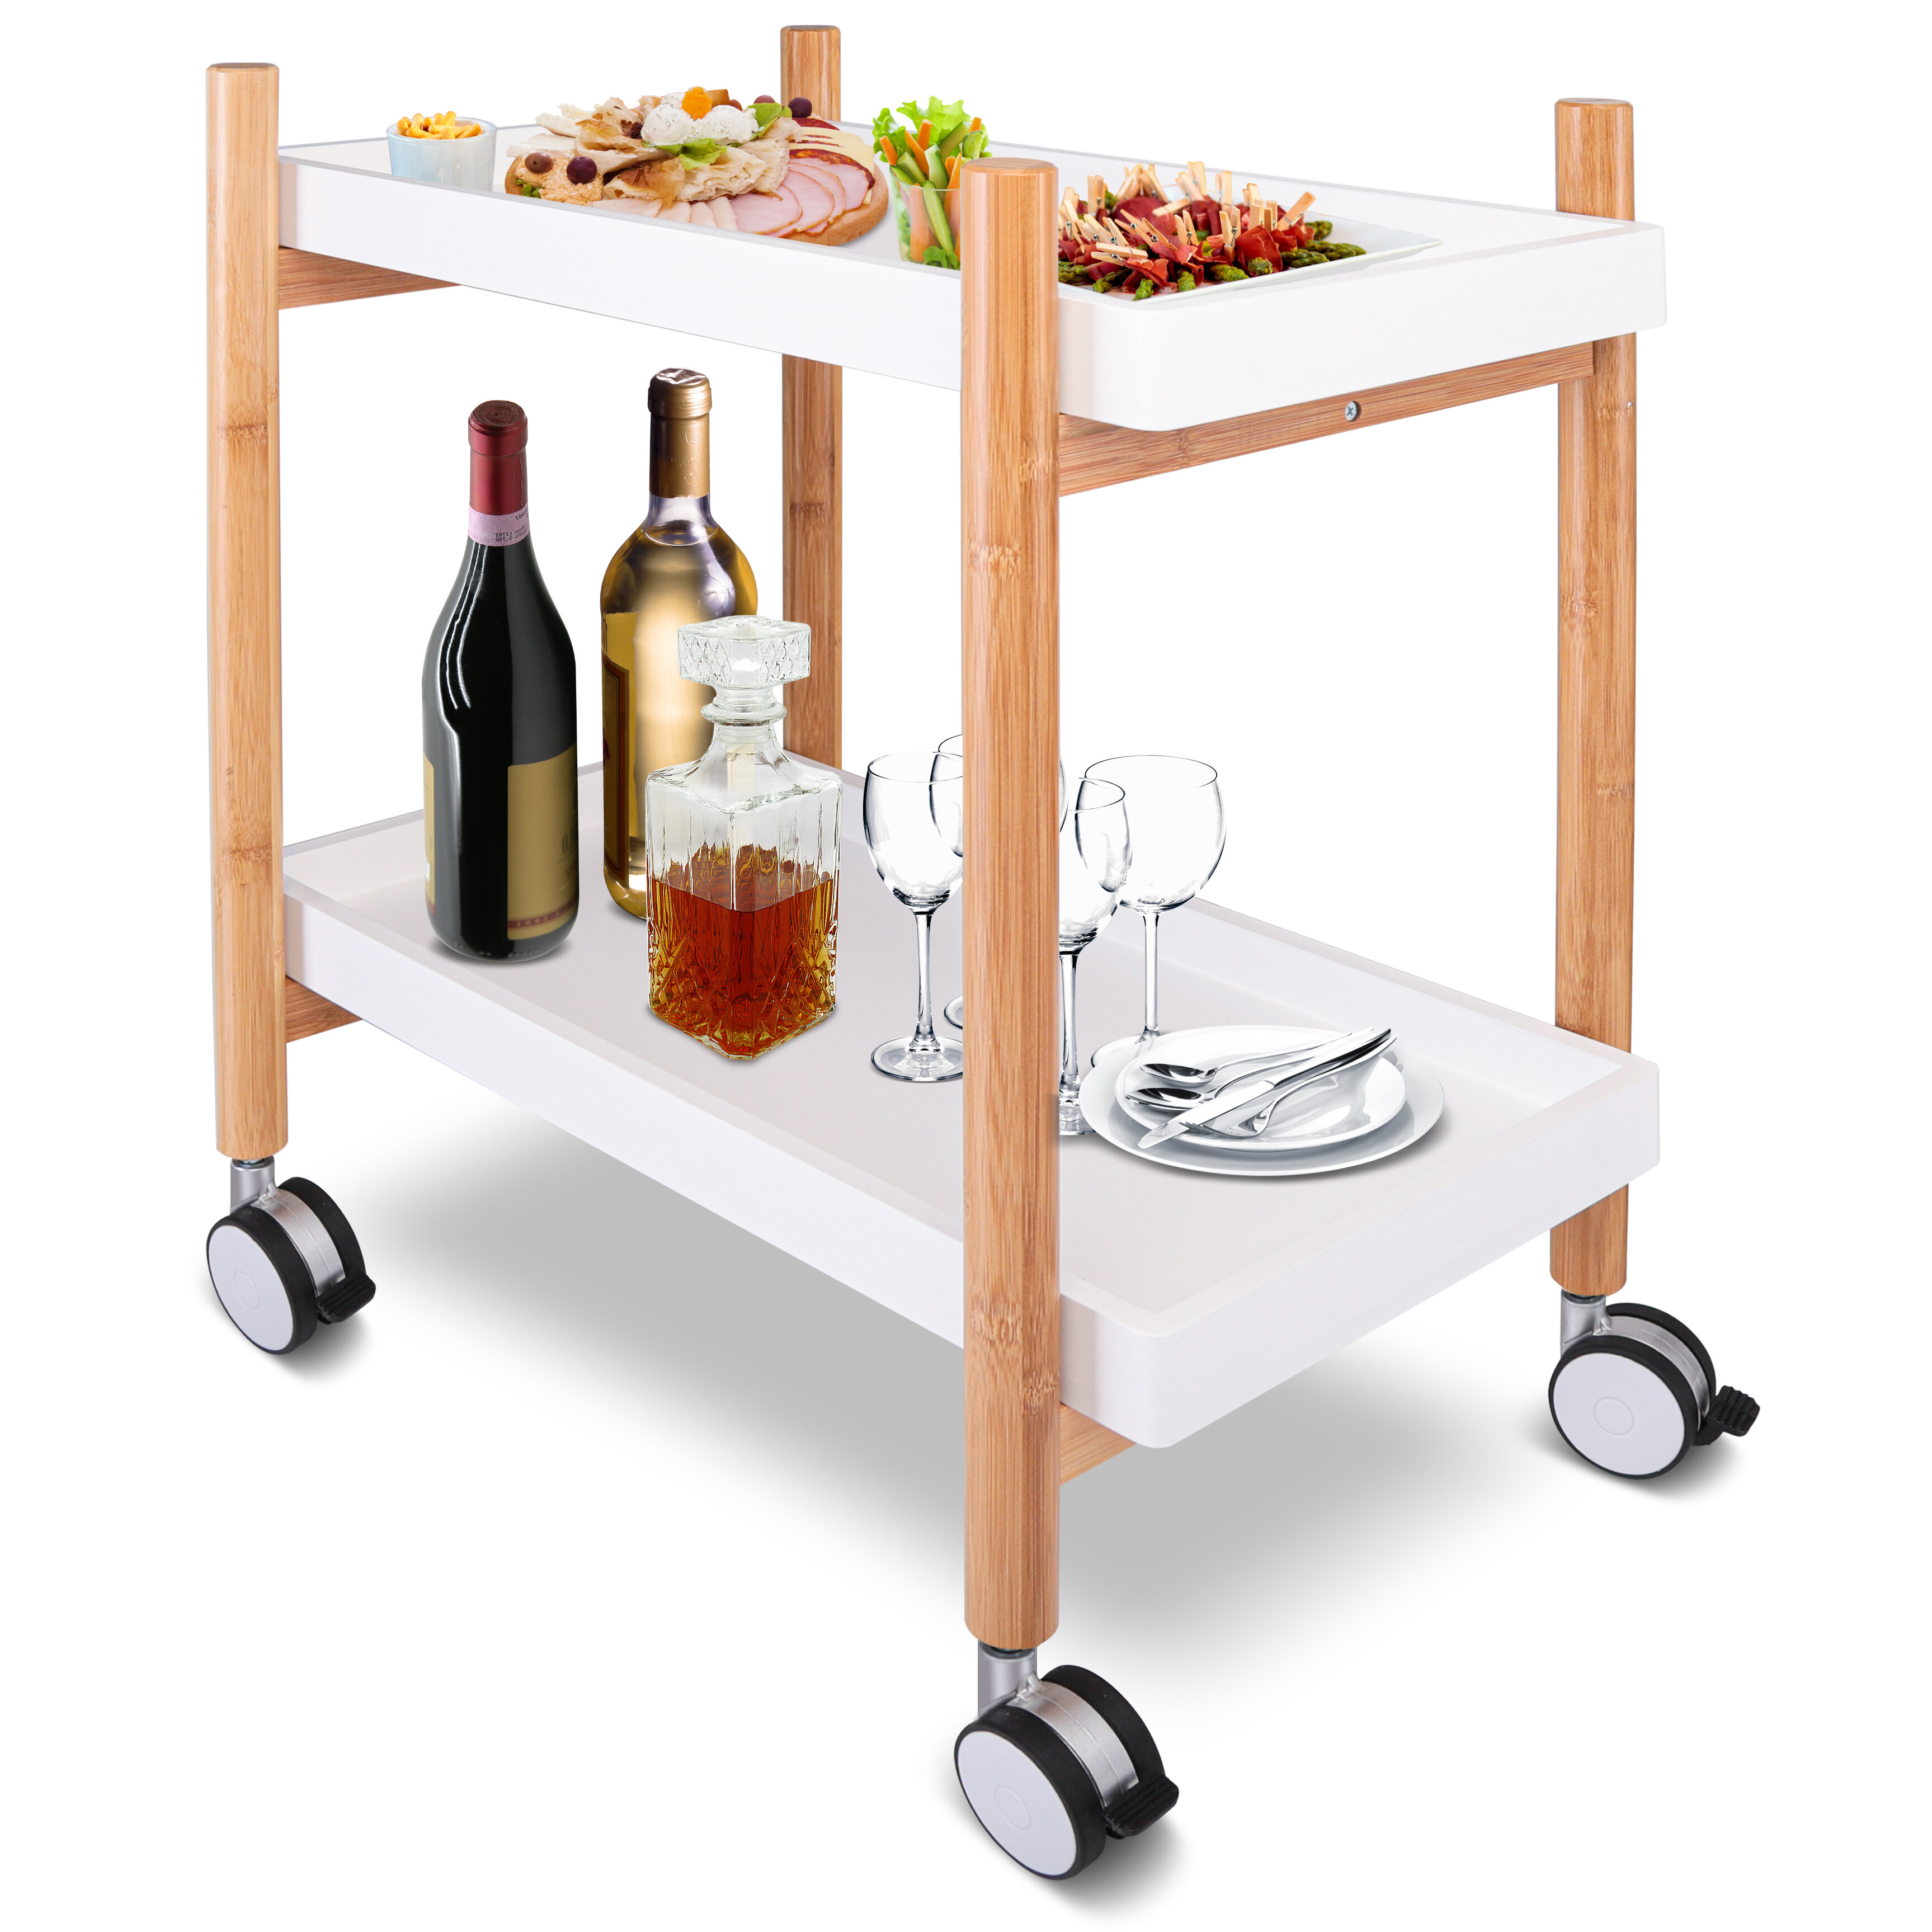 Modern Serving Cart for The Contemporary Home Abington Lane Two-Tier Contemporary bar Cart with Wheels Natural Wood Finish